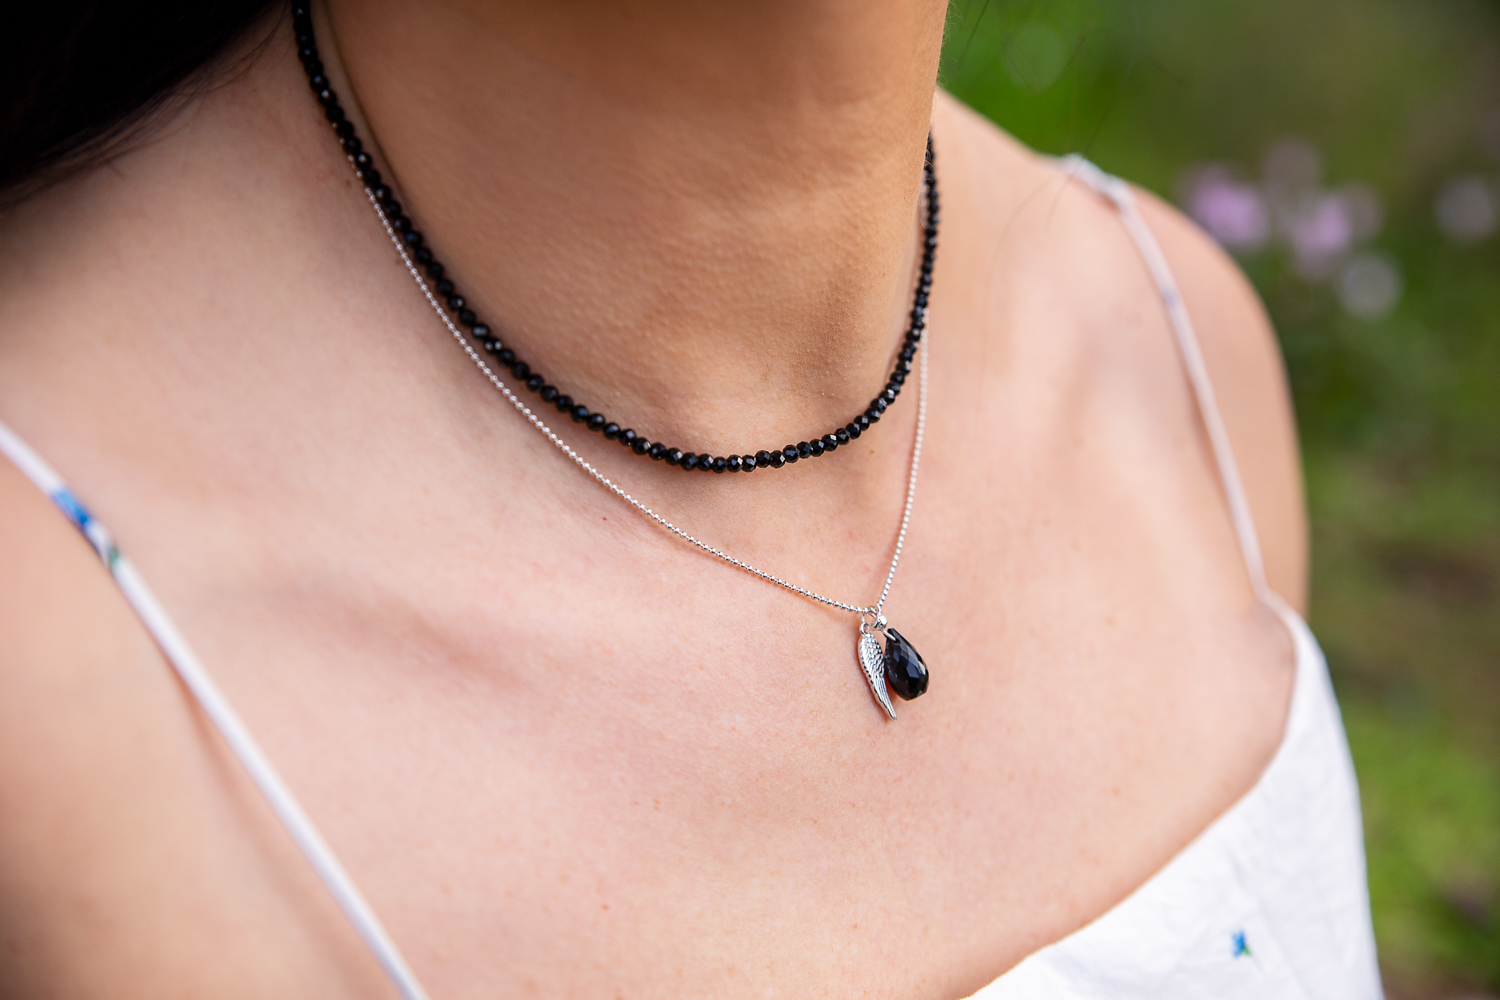 Black Spinel bead necklace